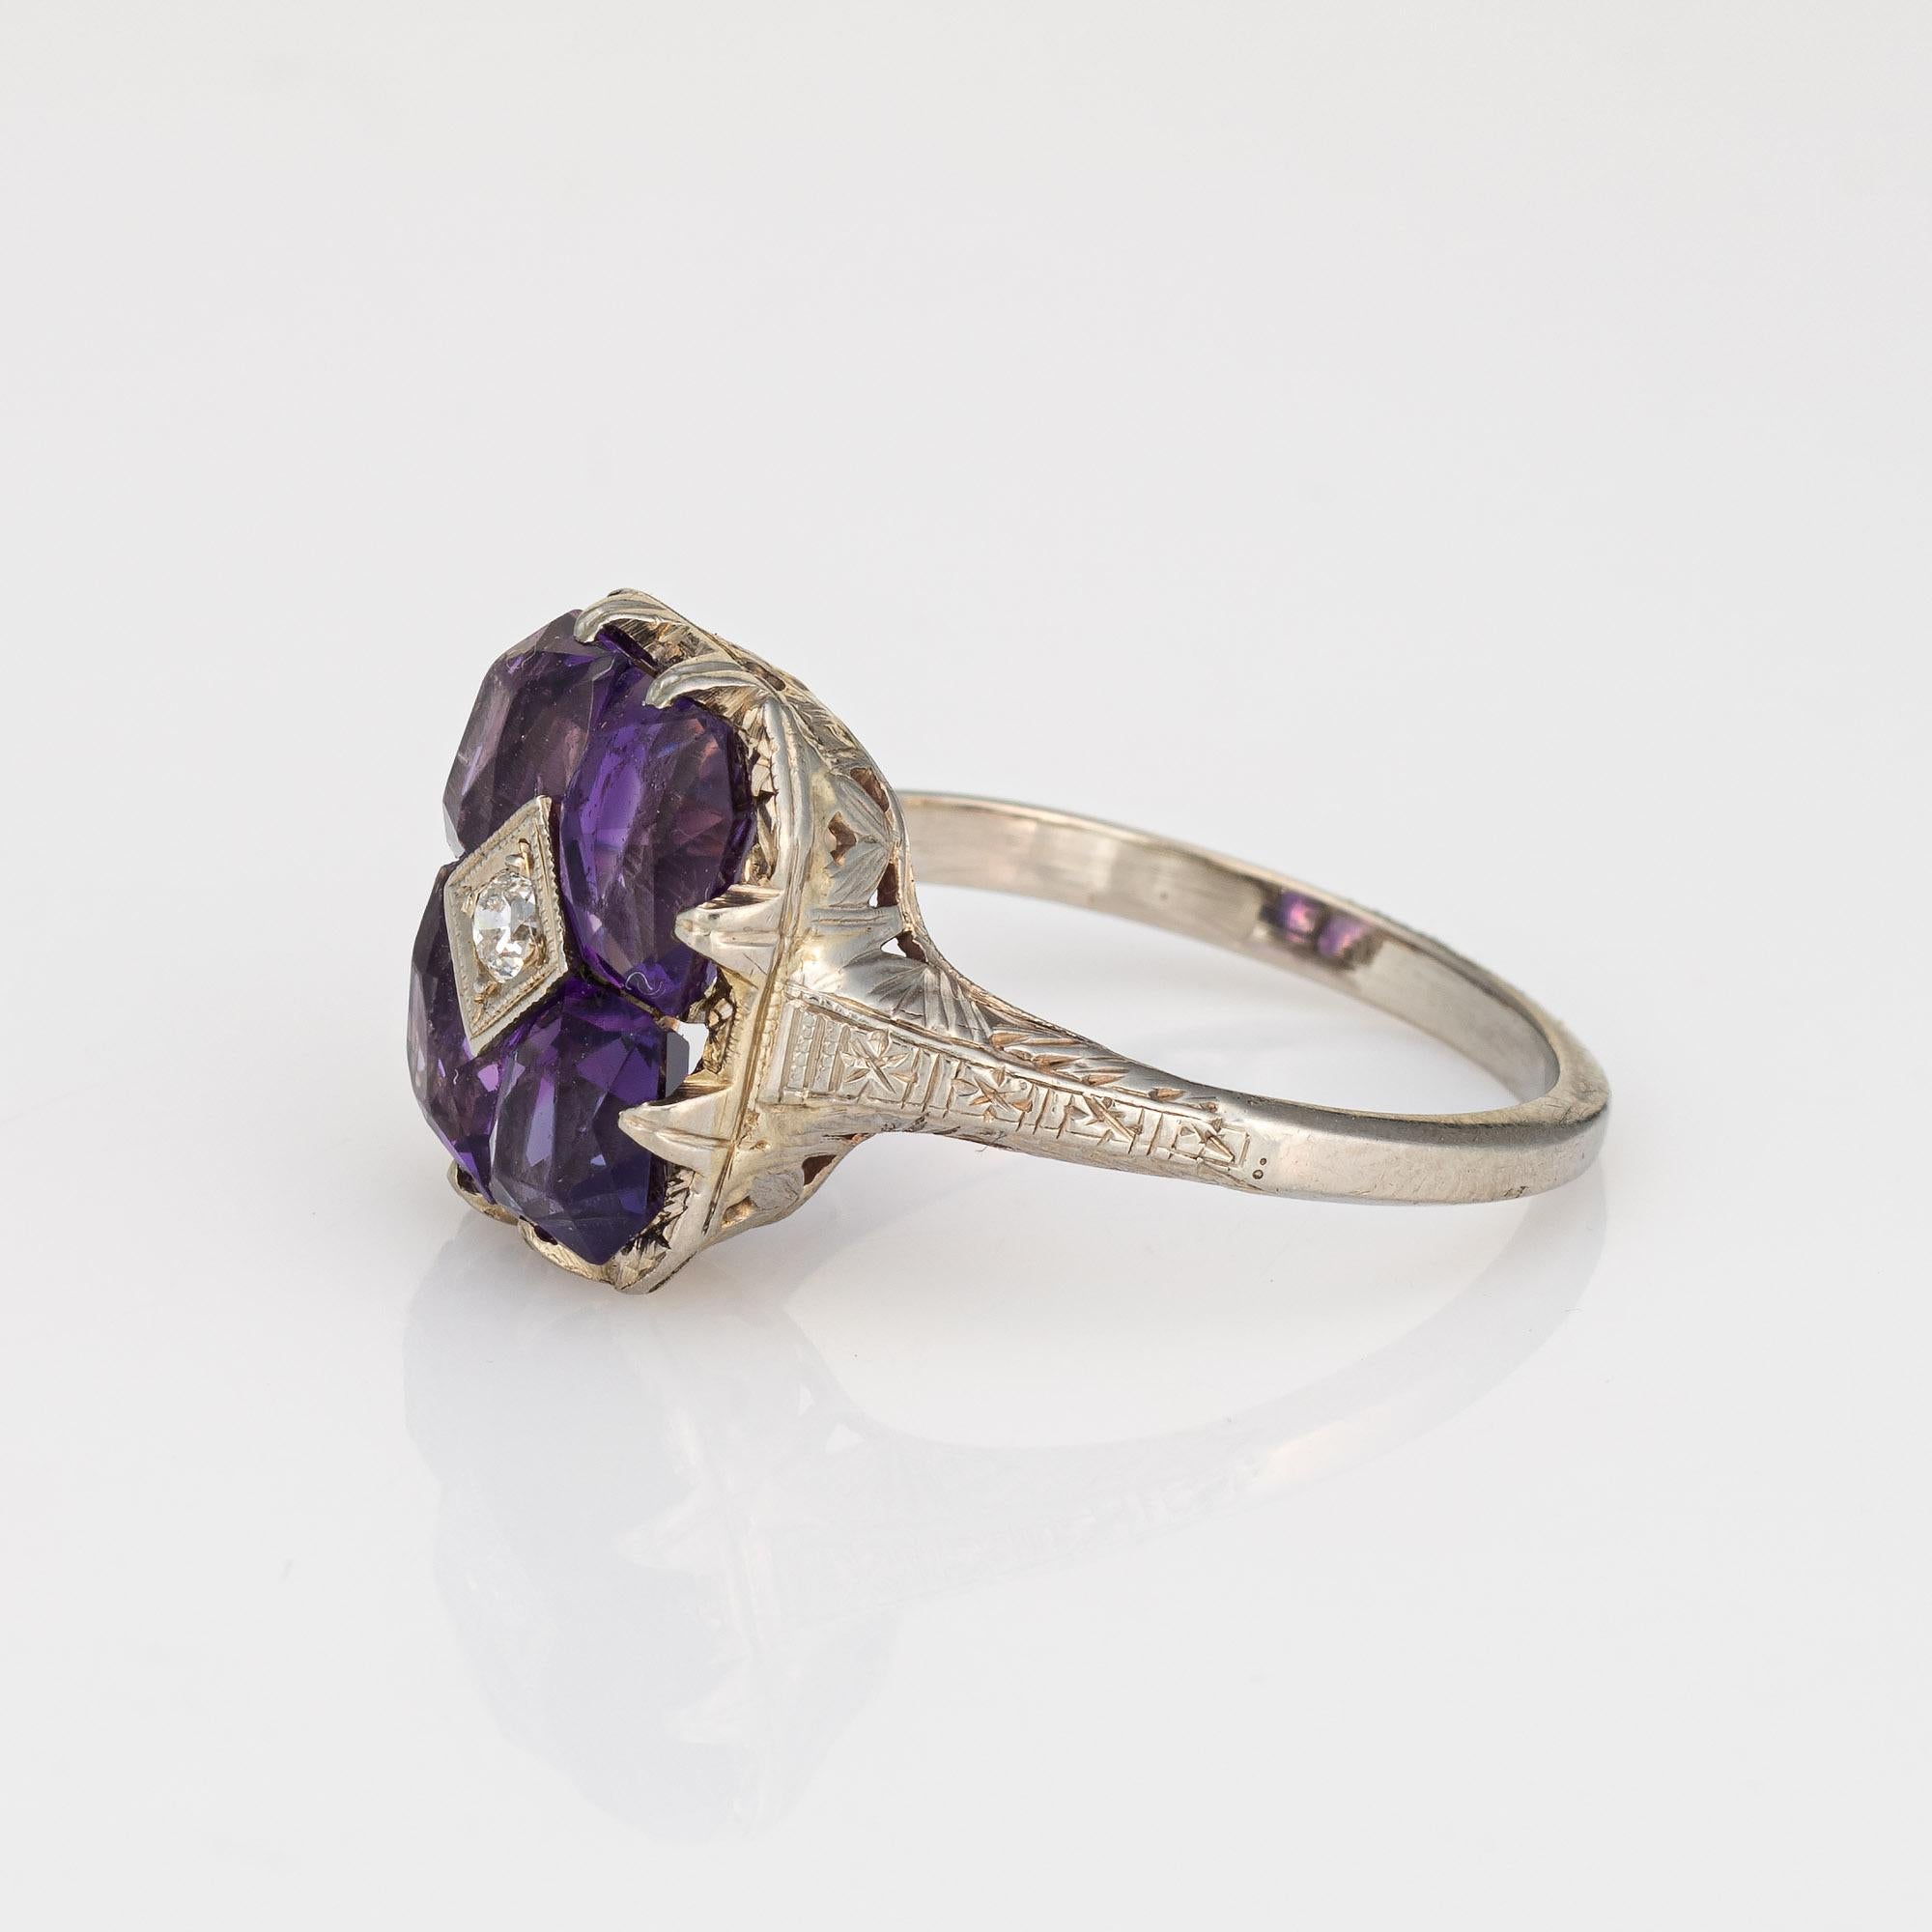 Vintage Art Deco Amethyst Diamond Ring Square Sz 7.25 Estate Fine Jewelry In Good Condition For Sale In Torrance, CA